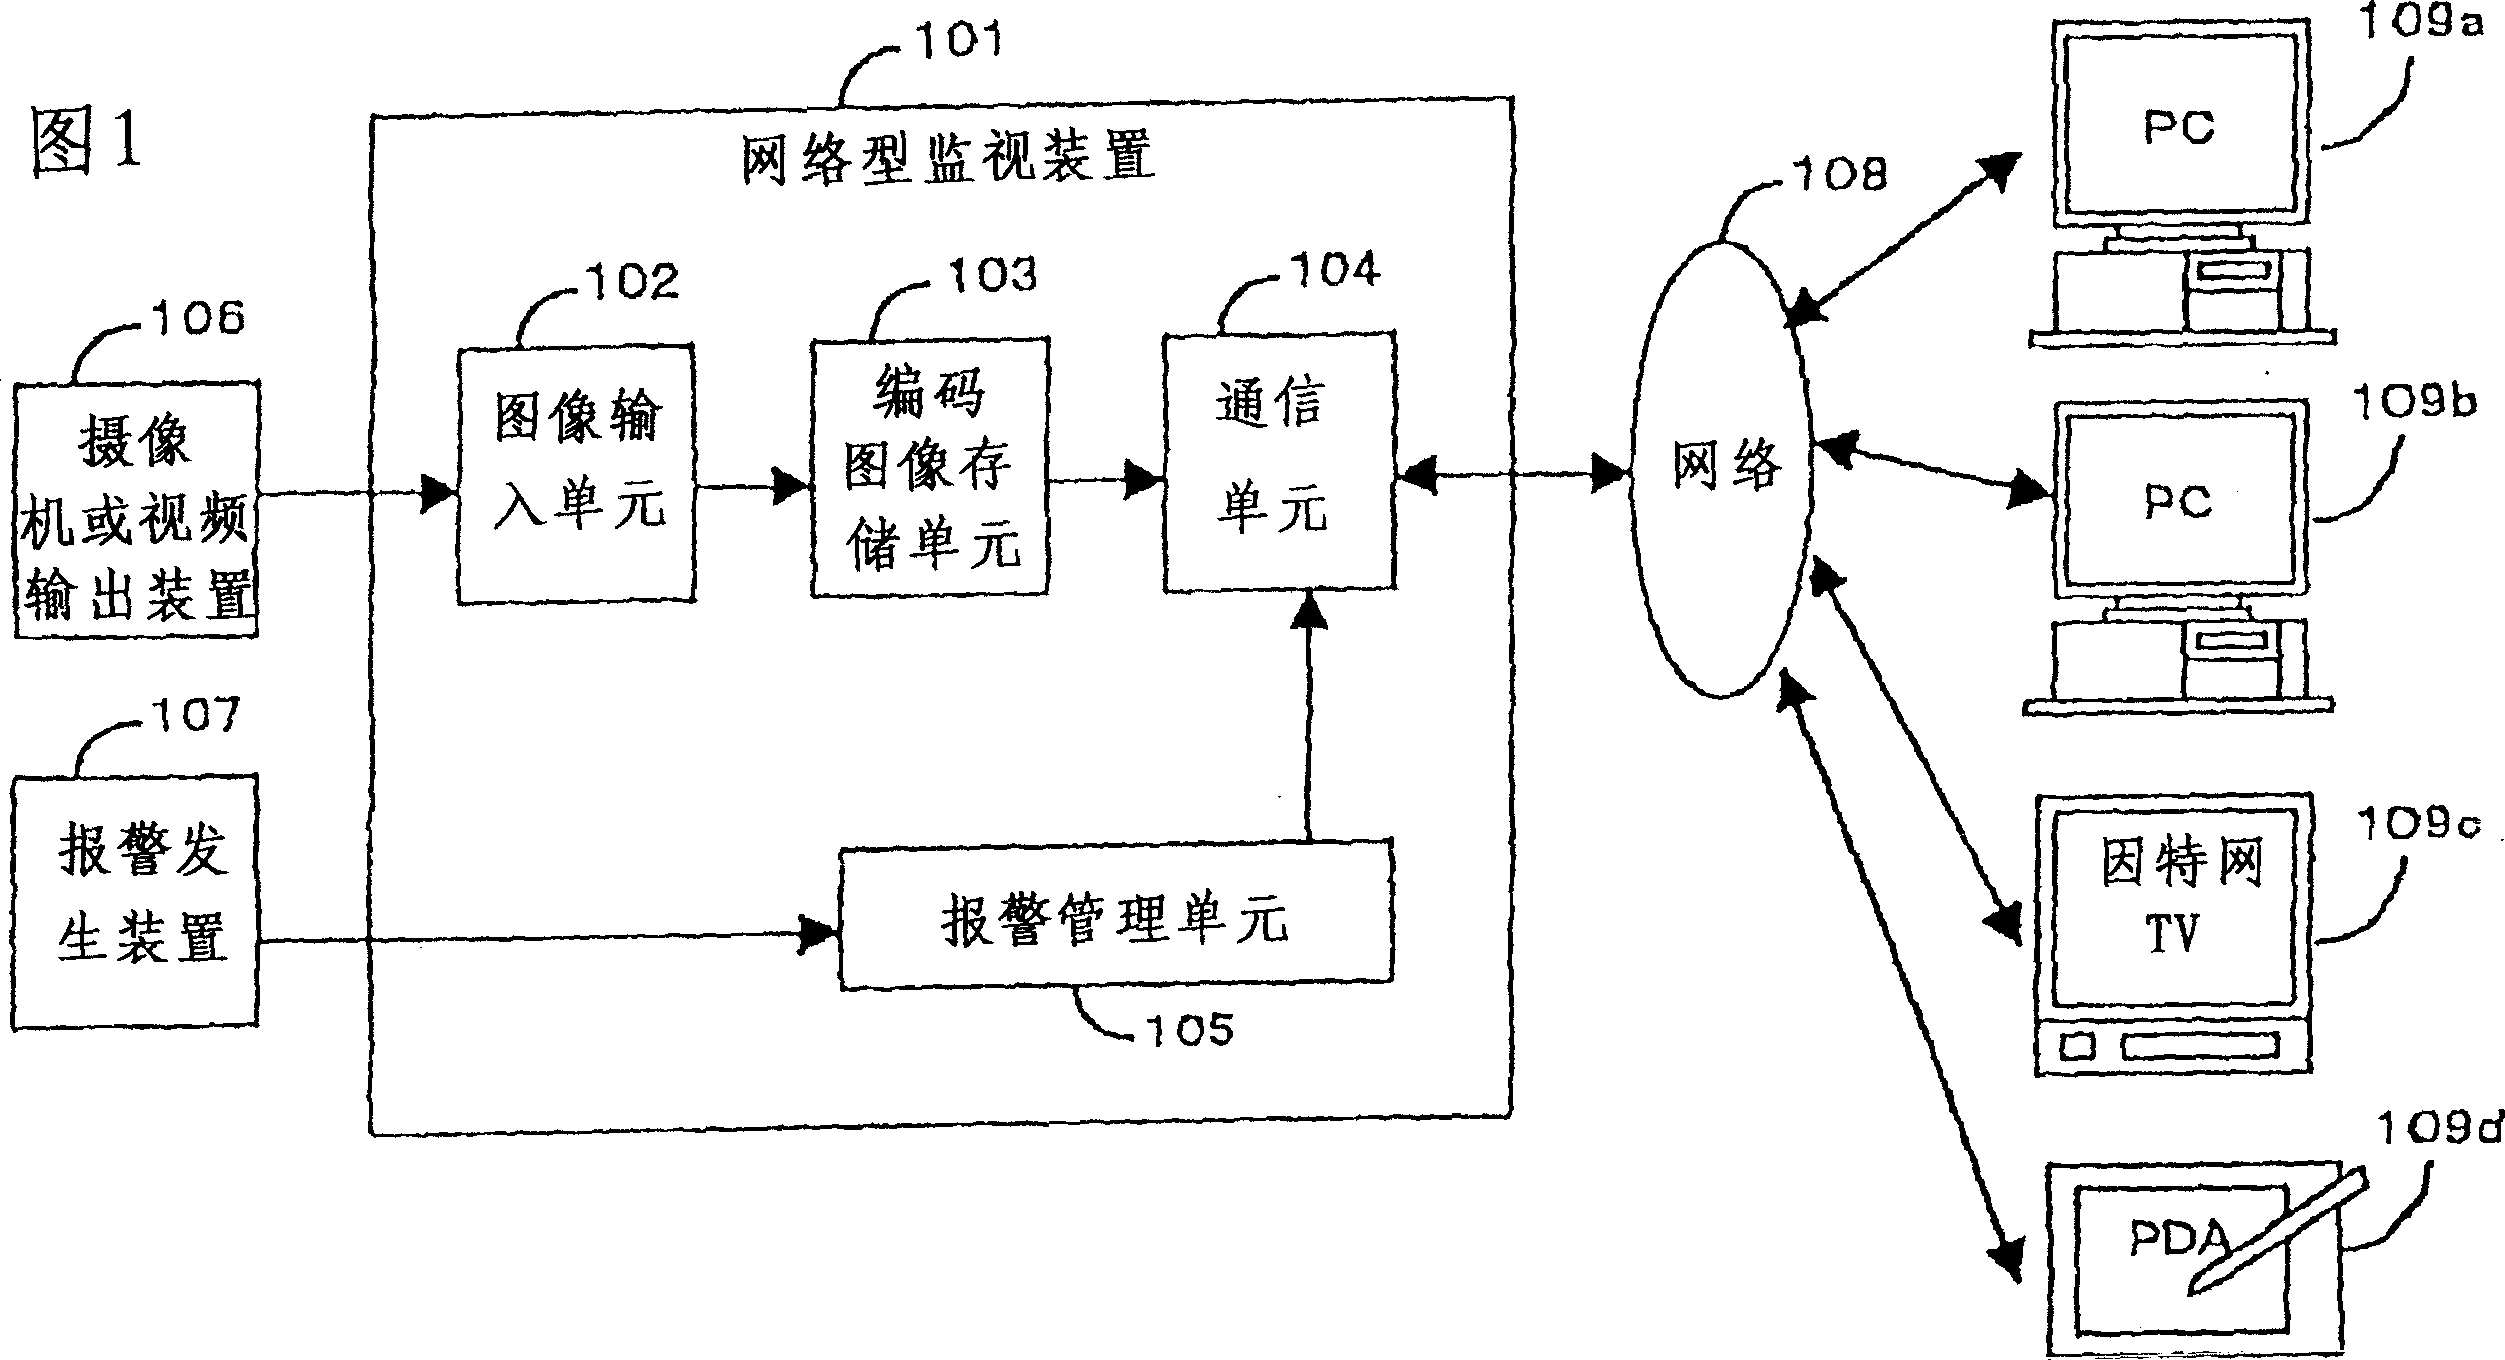 Network type monitoring device